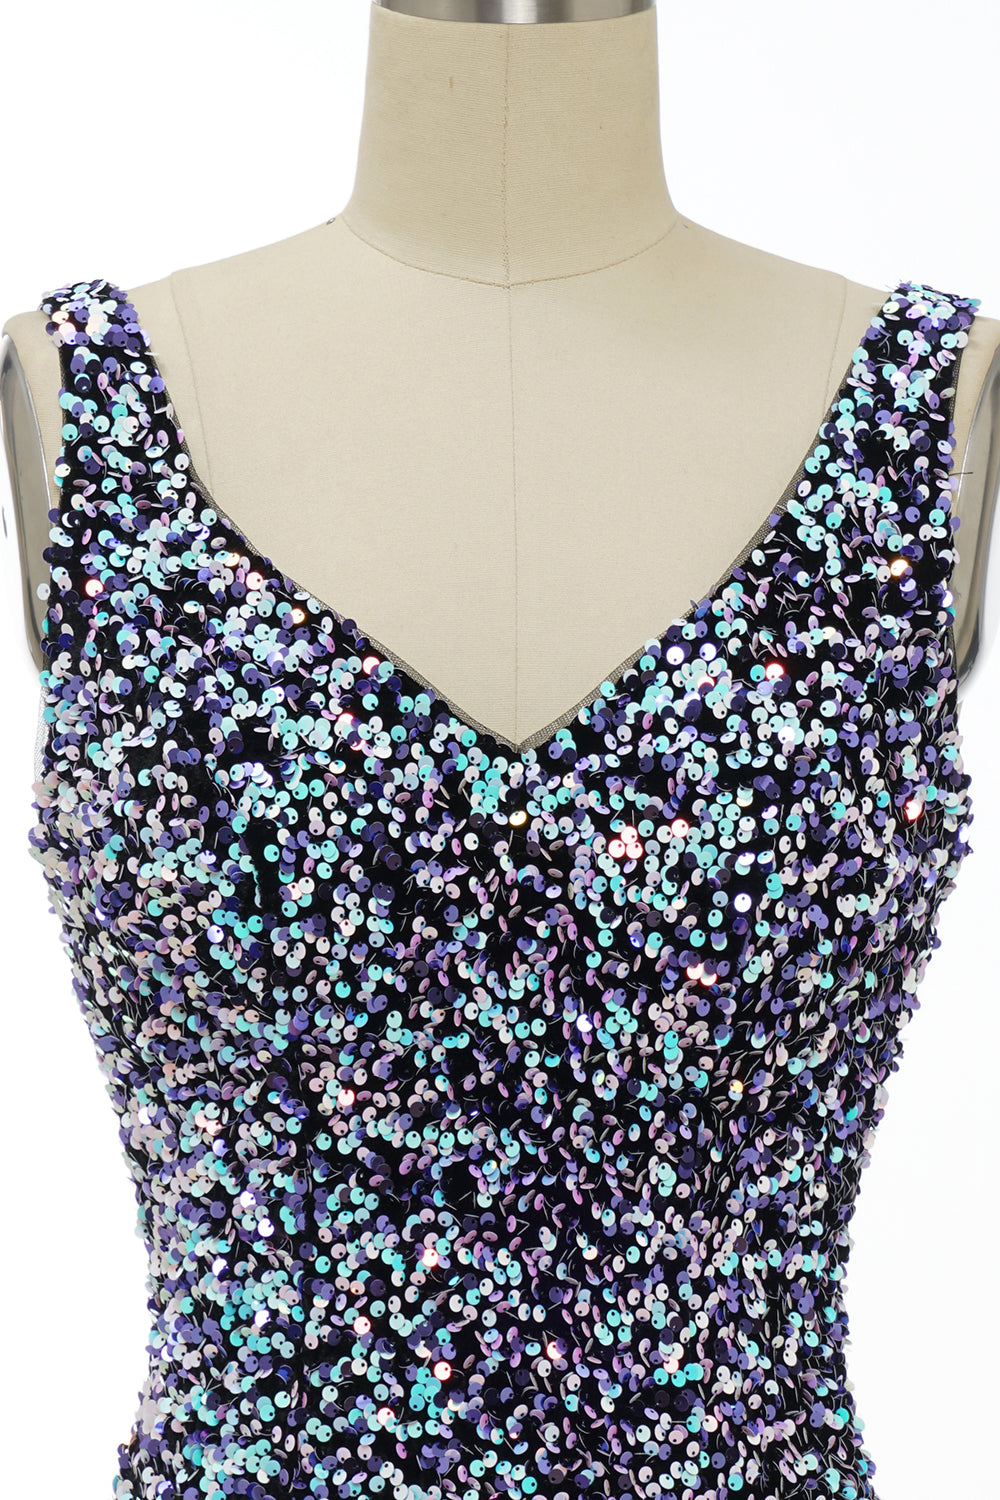 Black V-Neck Sequins Fitted Tight Homecoming Dress